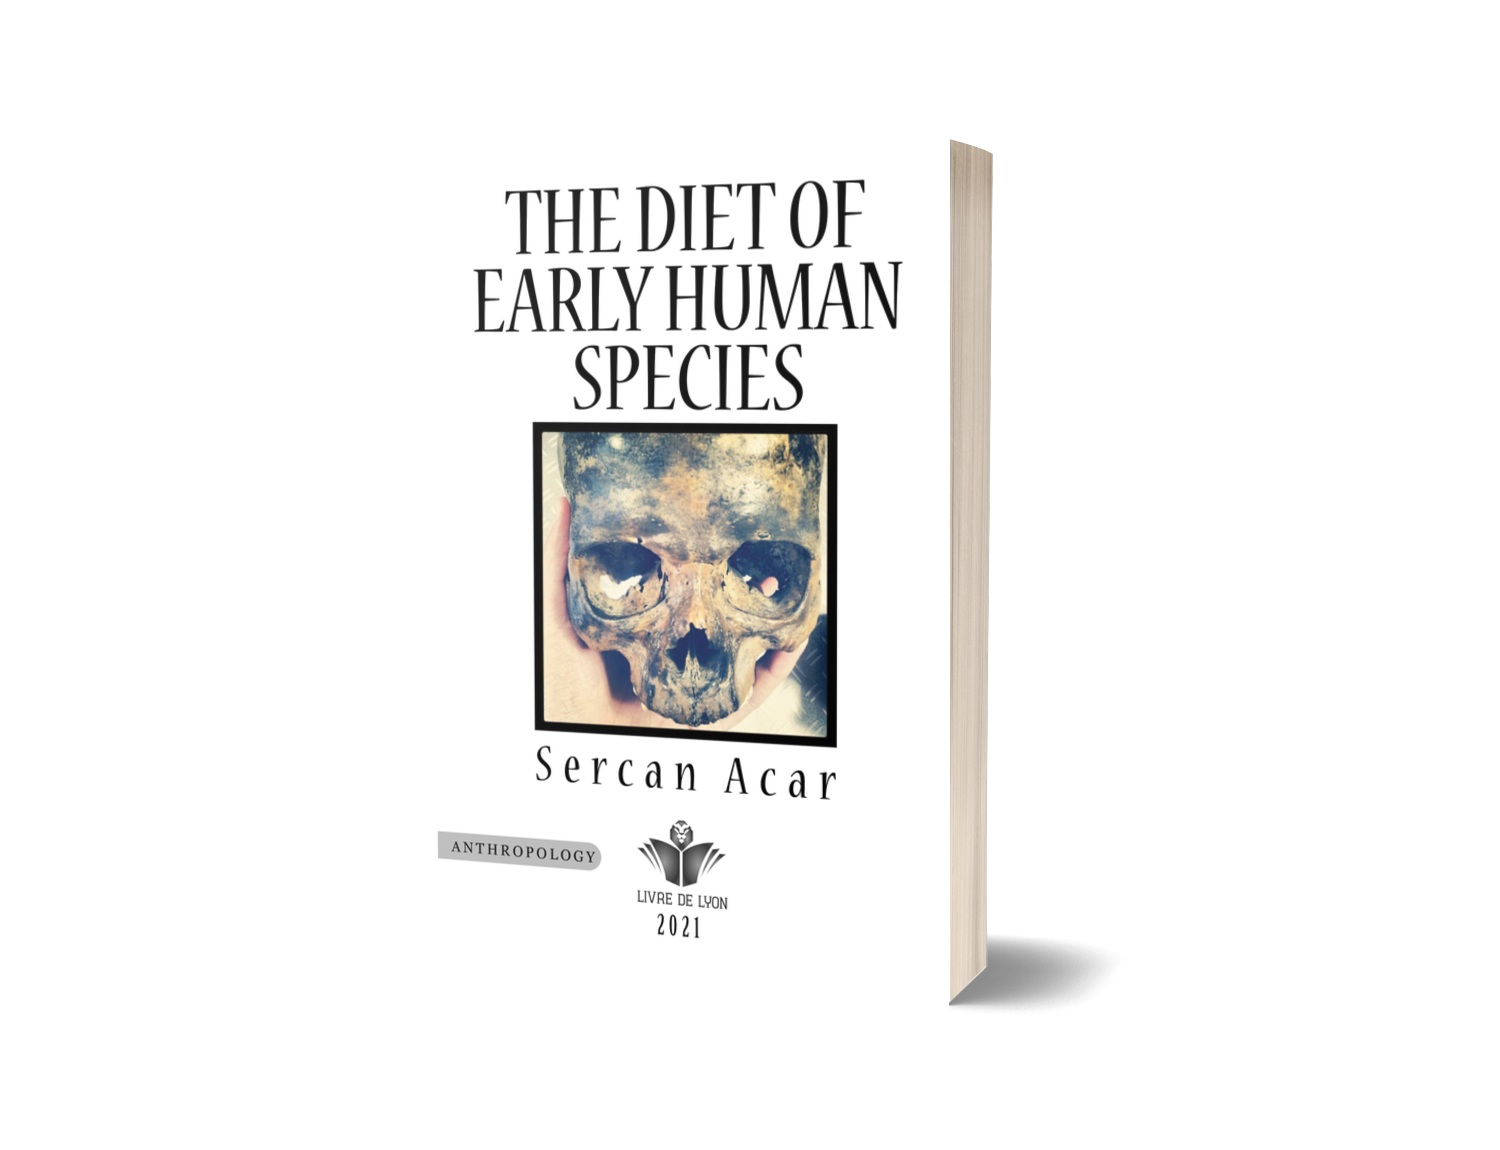 The Diet of Early Human Species